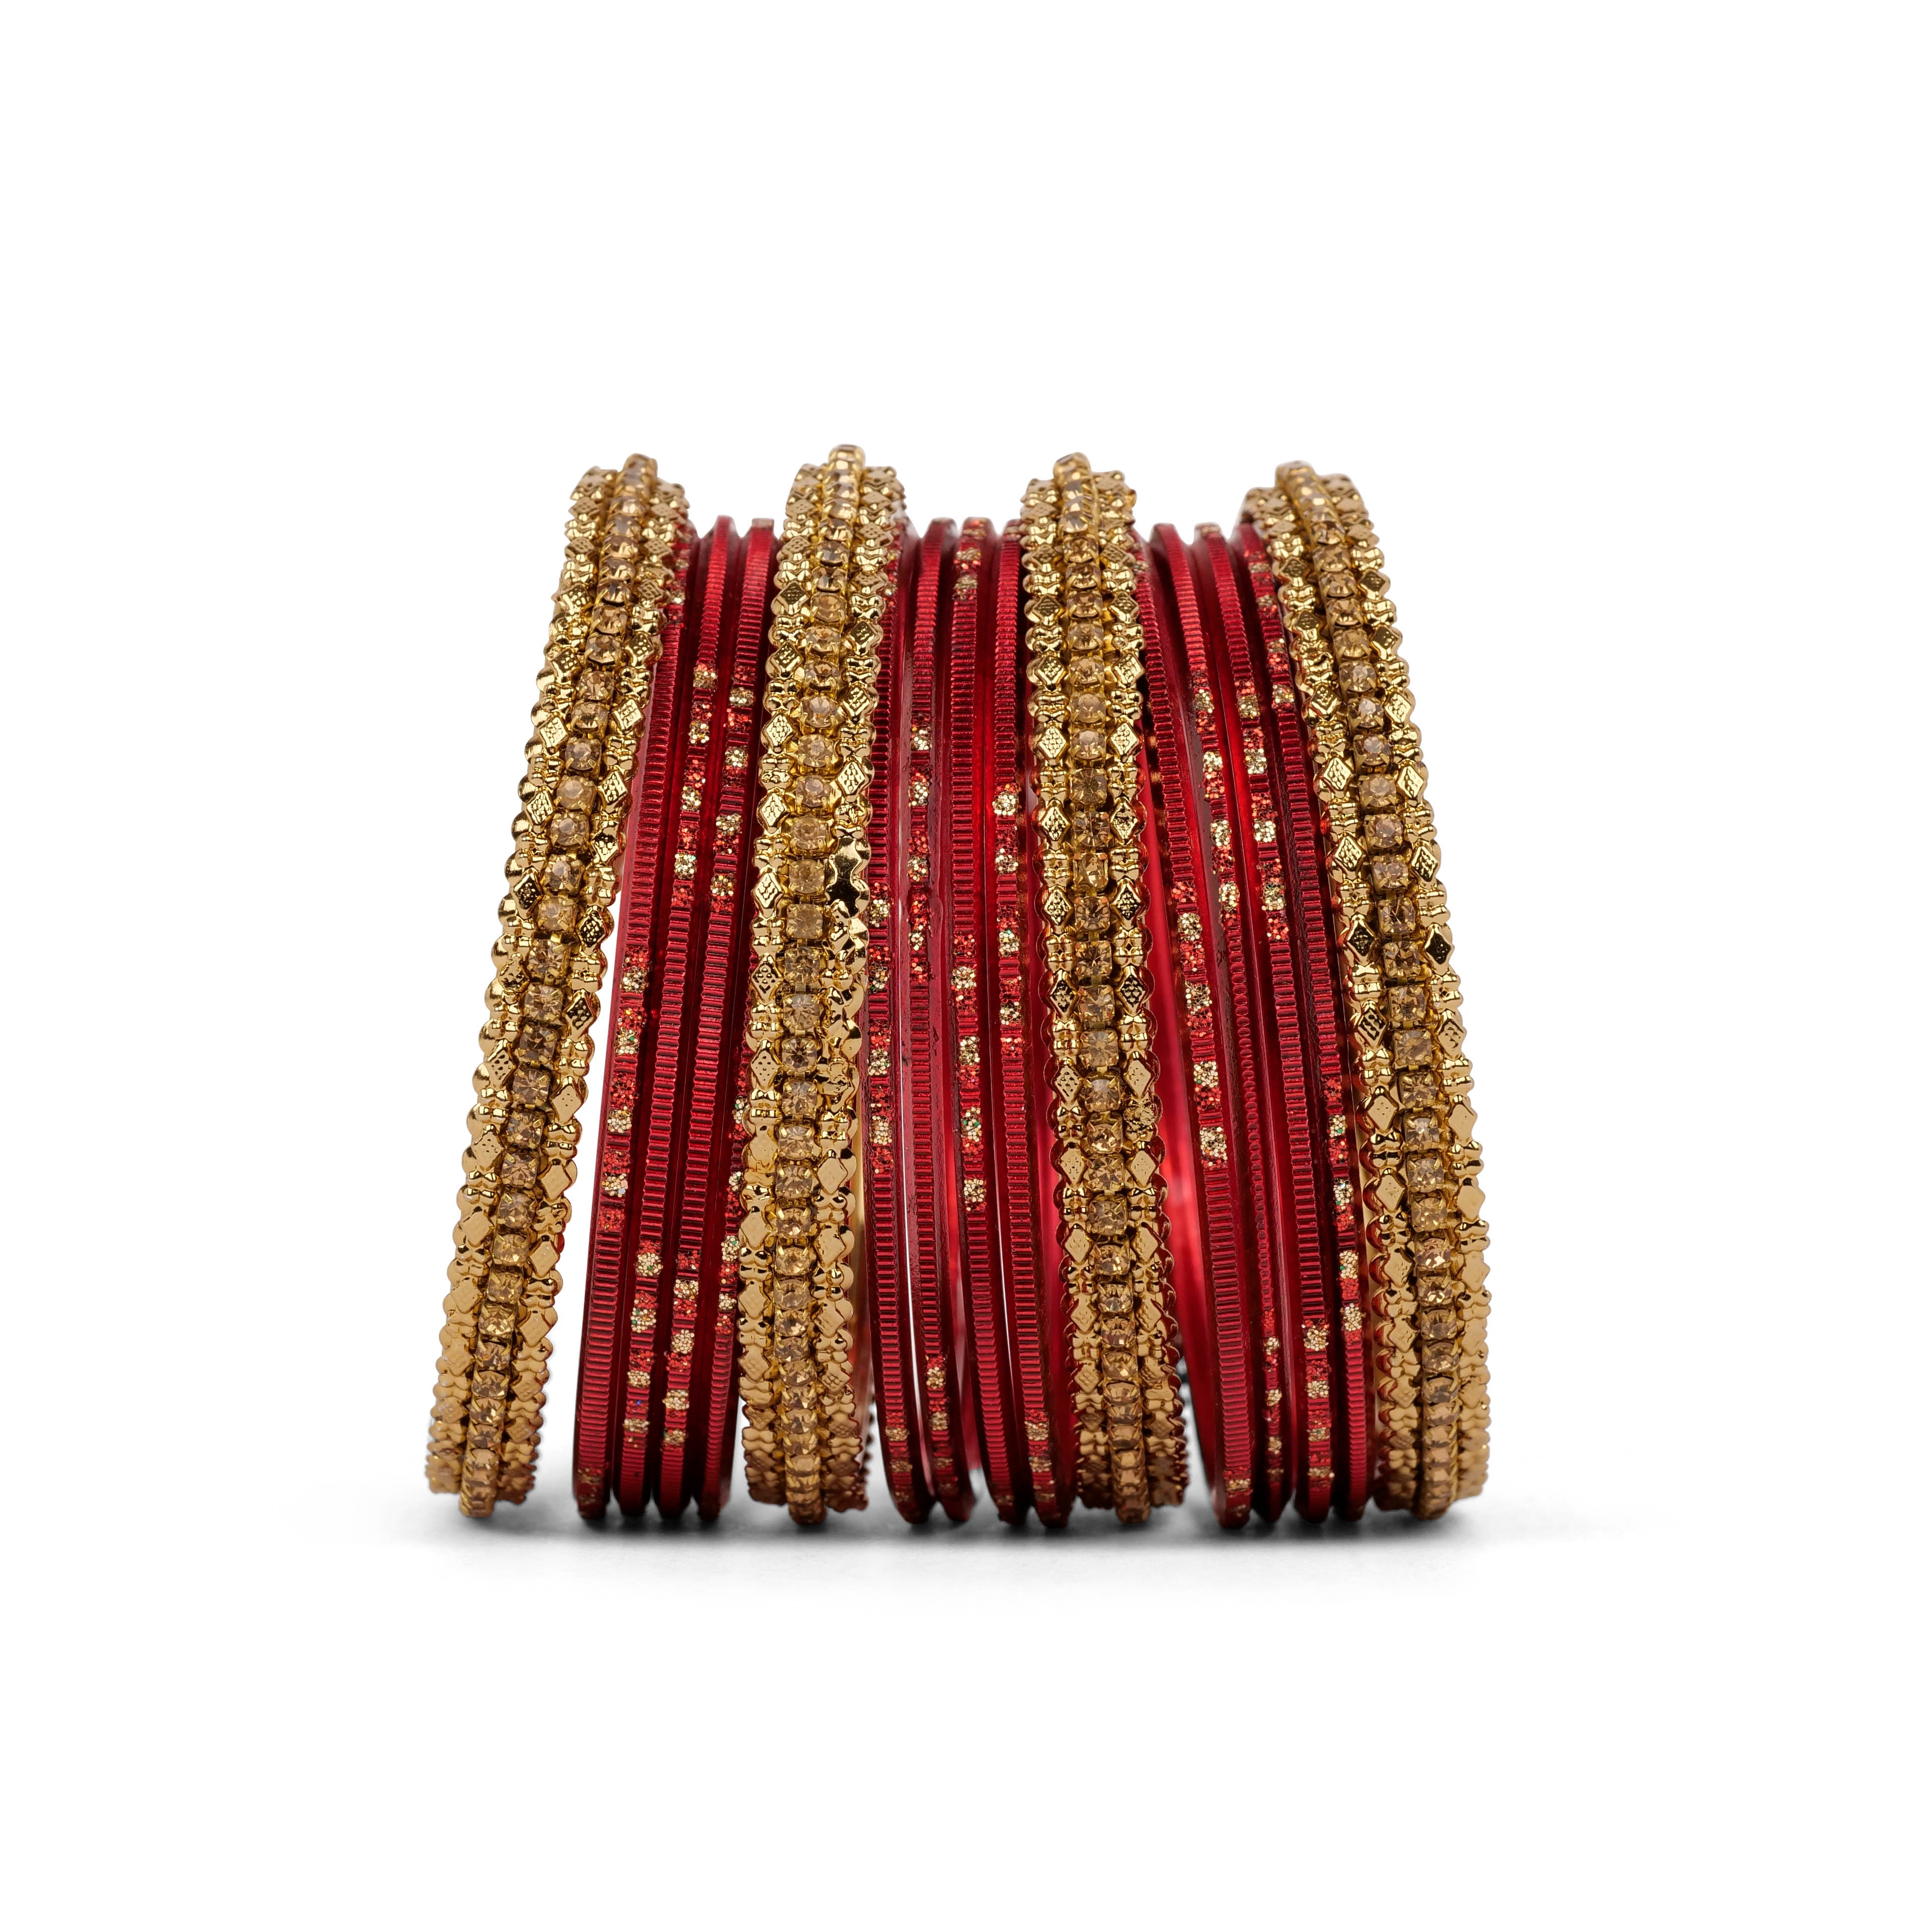 Simple Bangle Set in Red and Antique Gold